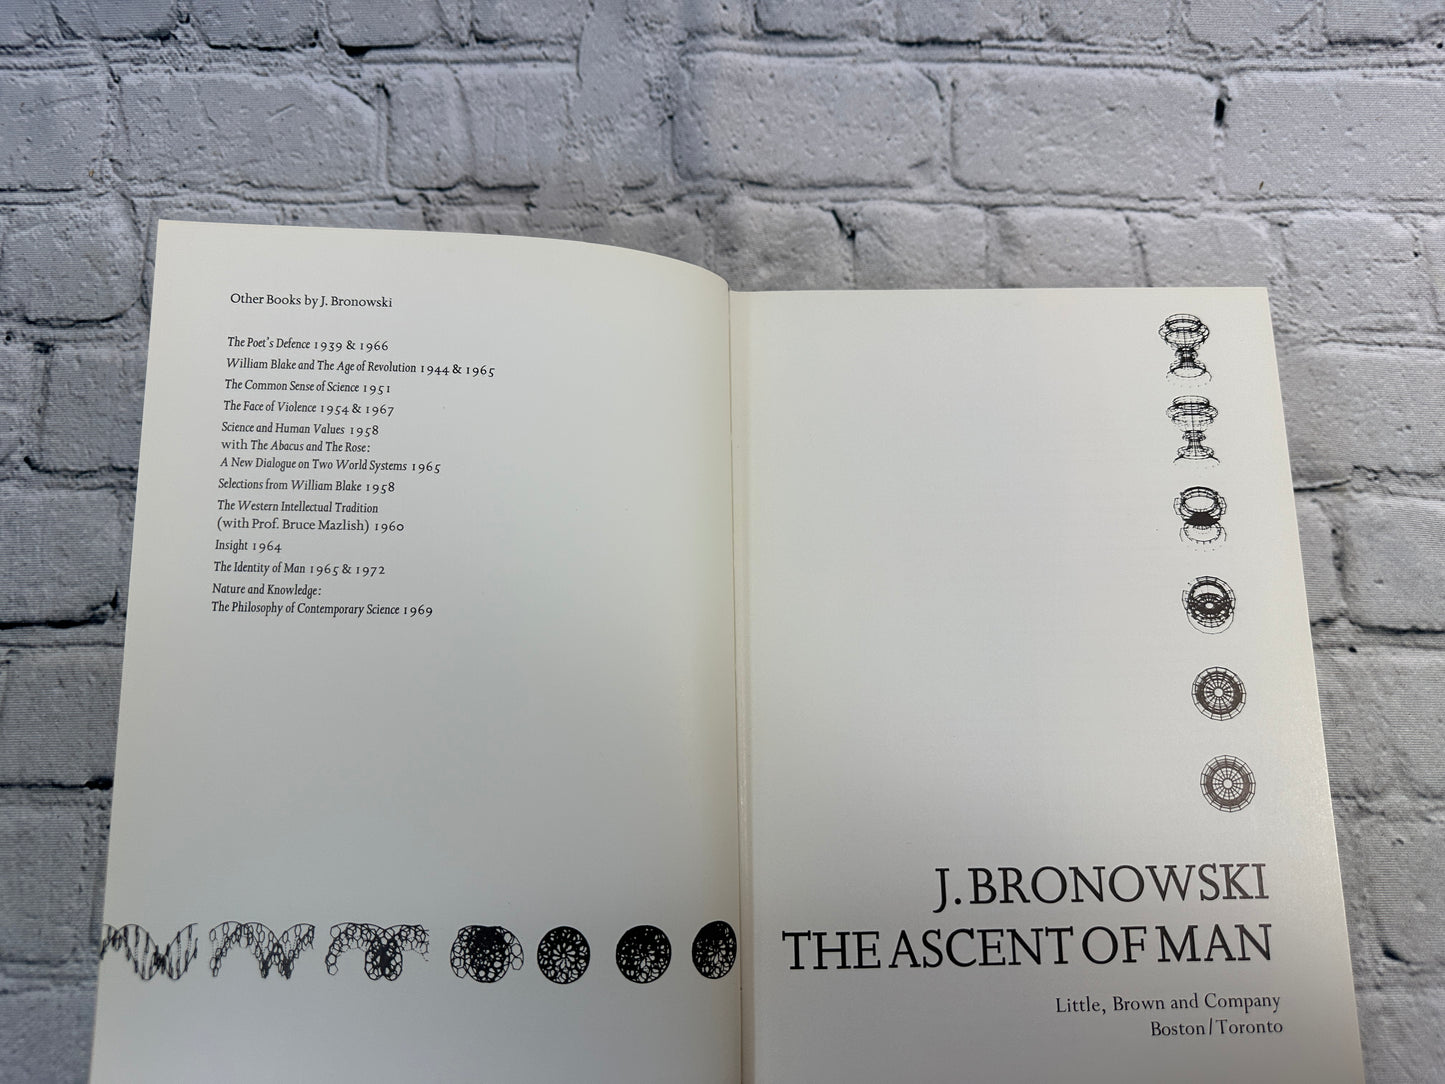 The Ascent of Man by J. Bronowski [1973]